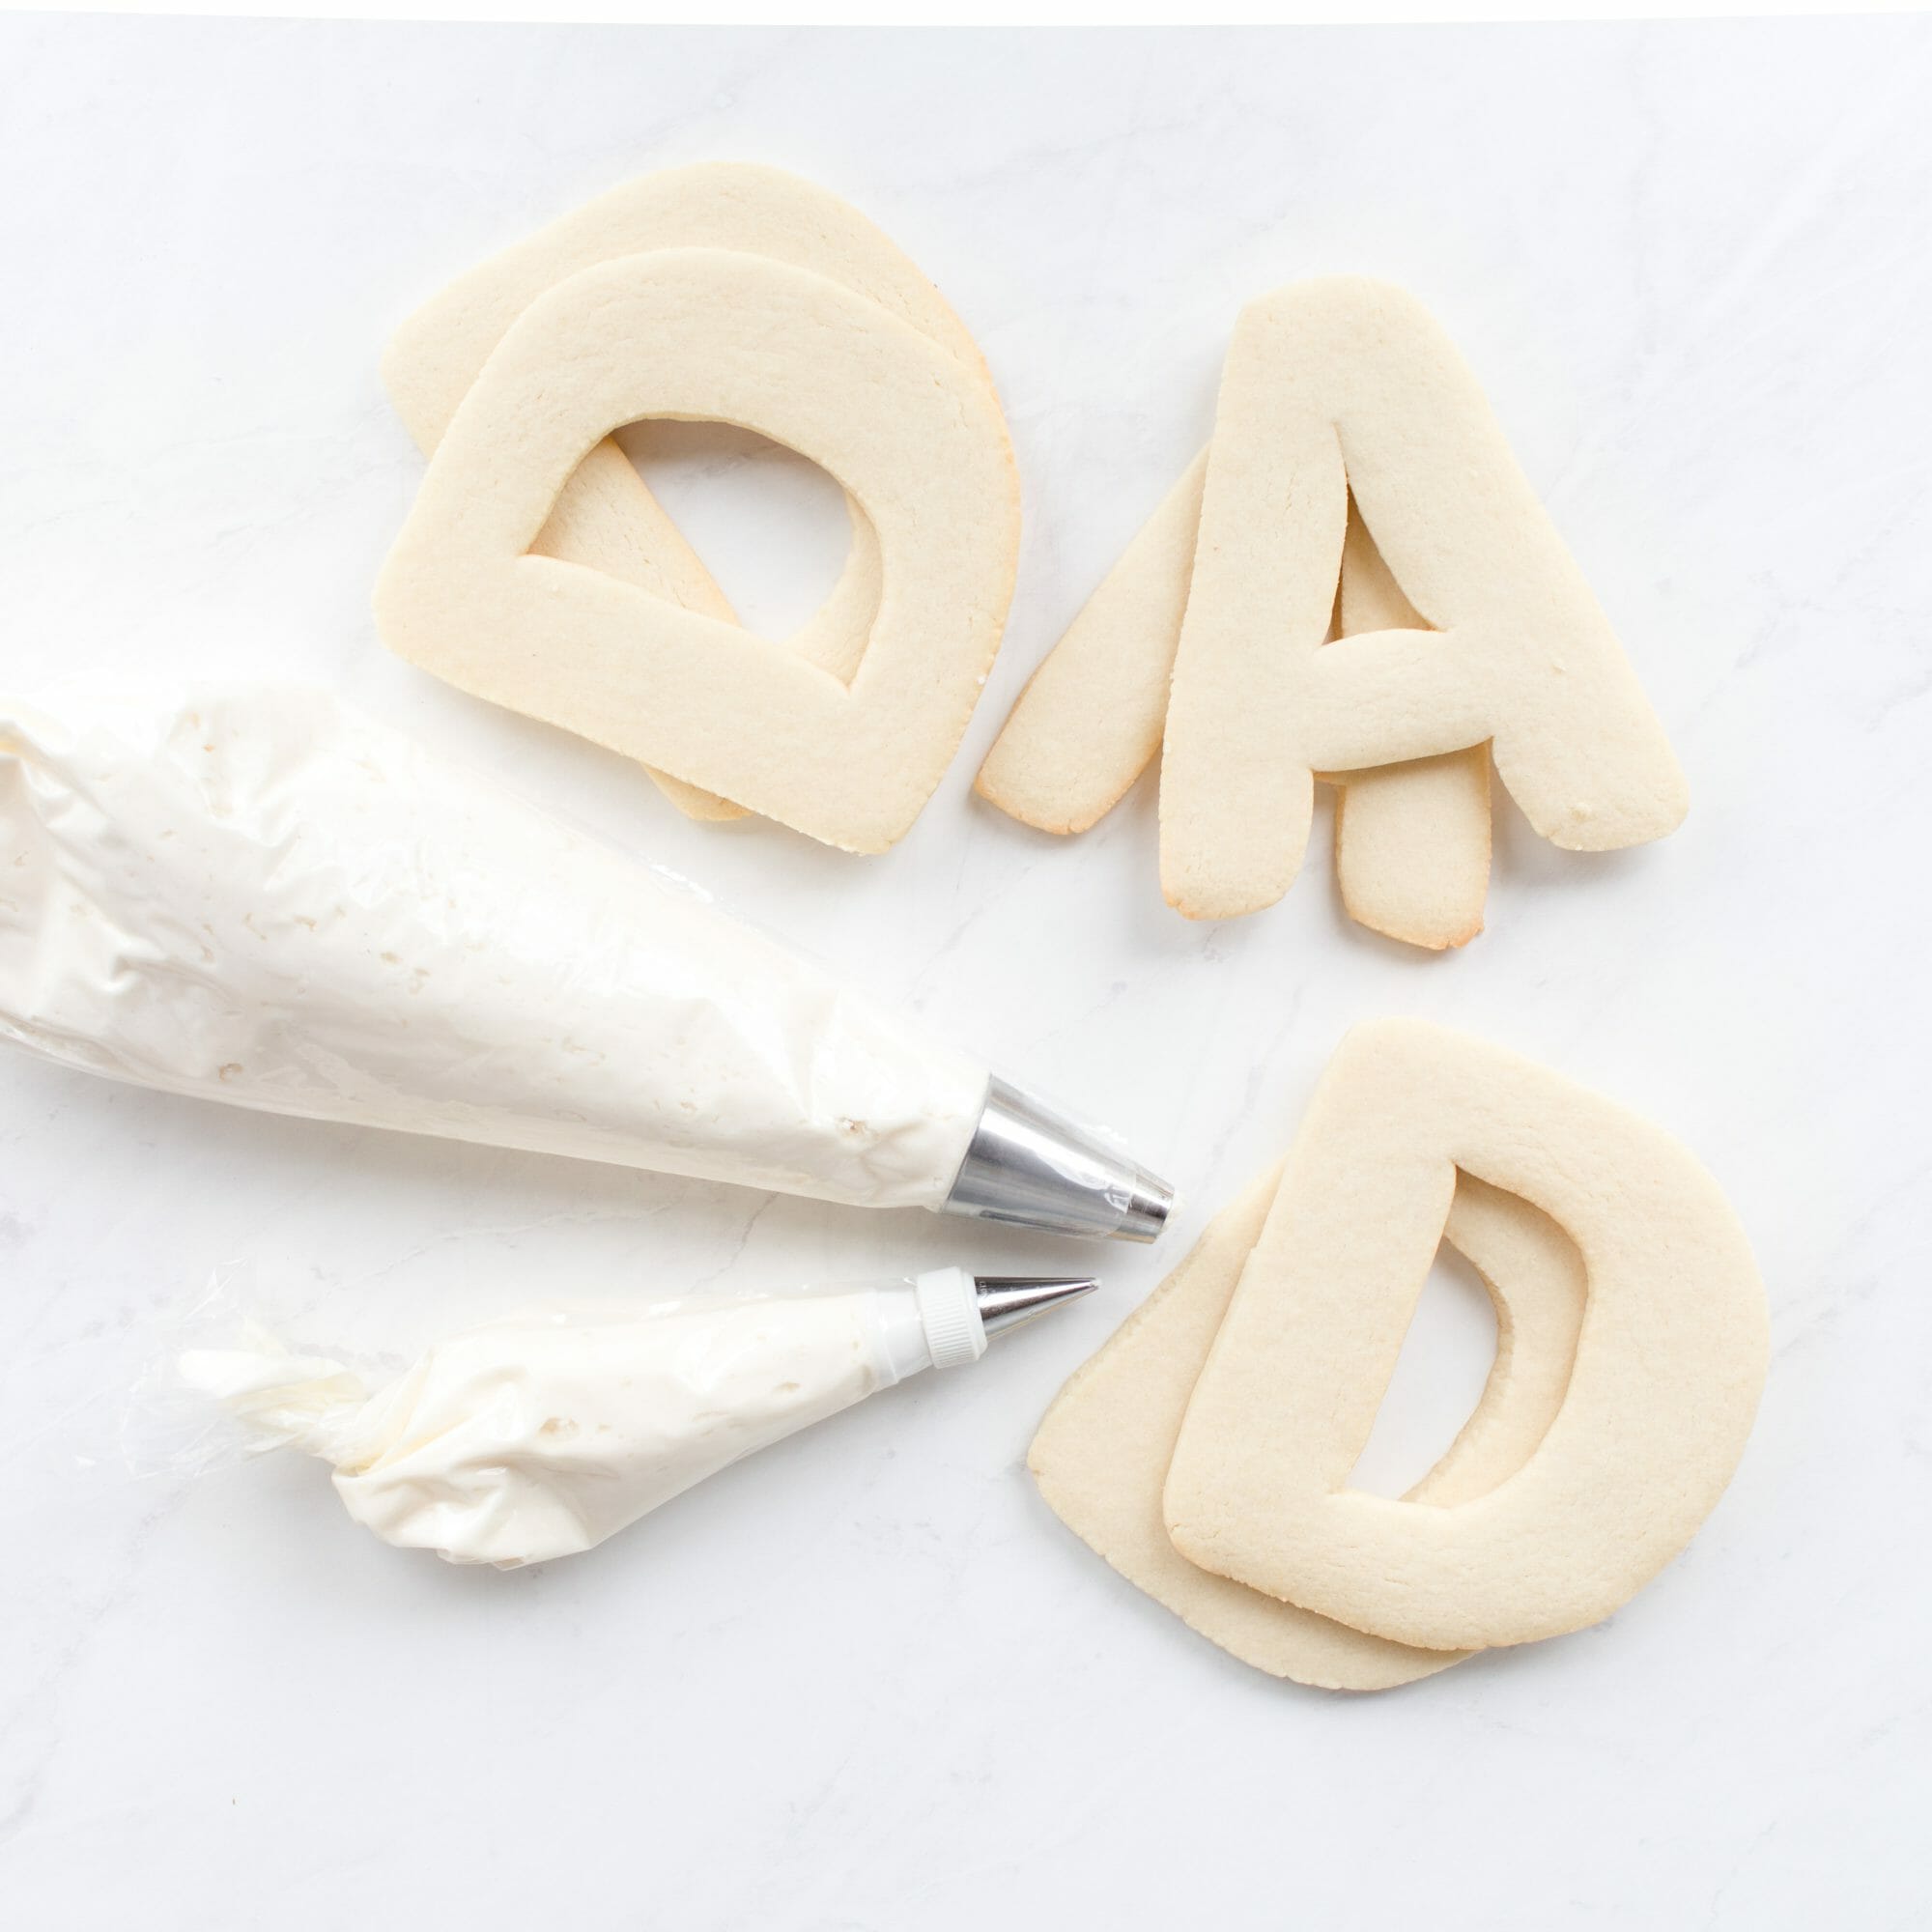 DAD Cookie Cake | Father's Day ideas for kids | Father's Day desserts | diy Father's Day ideas || JennyCookies.com #dadcookies #fathersday #fathersdaygift #diyfathersday #giftideas #jennycookies